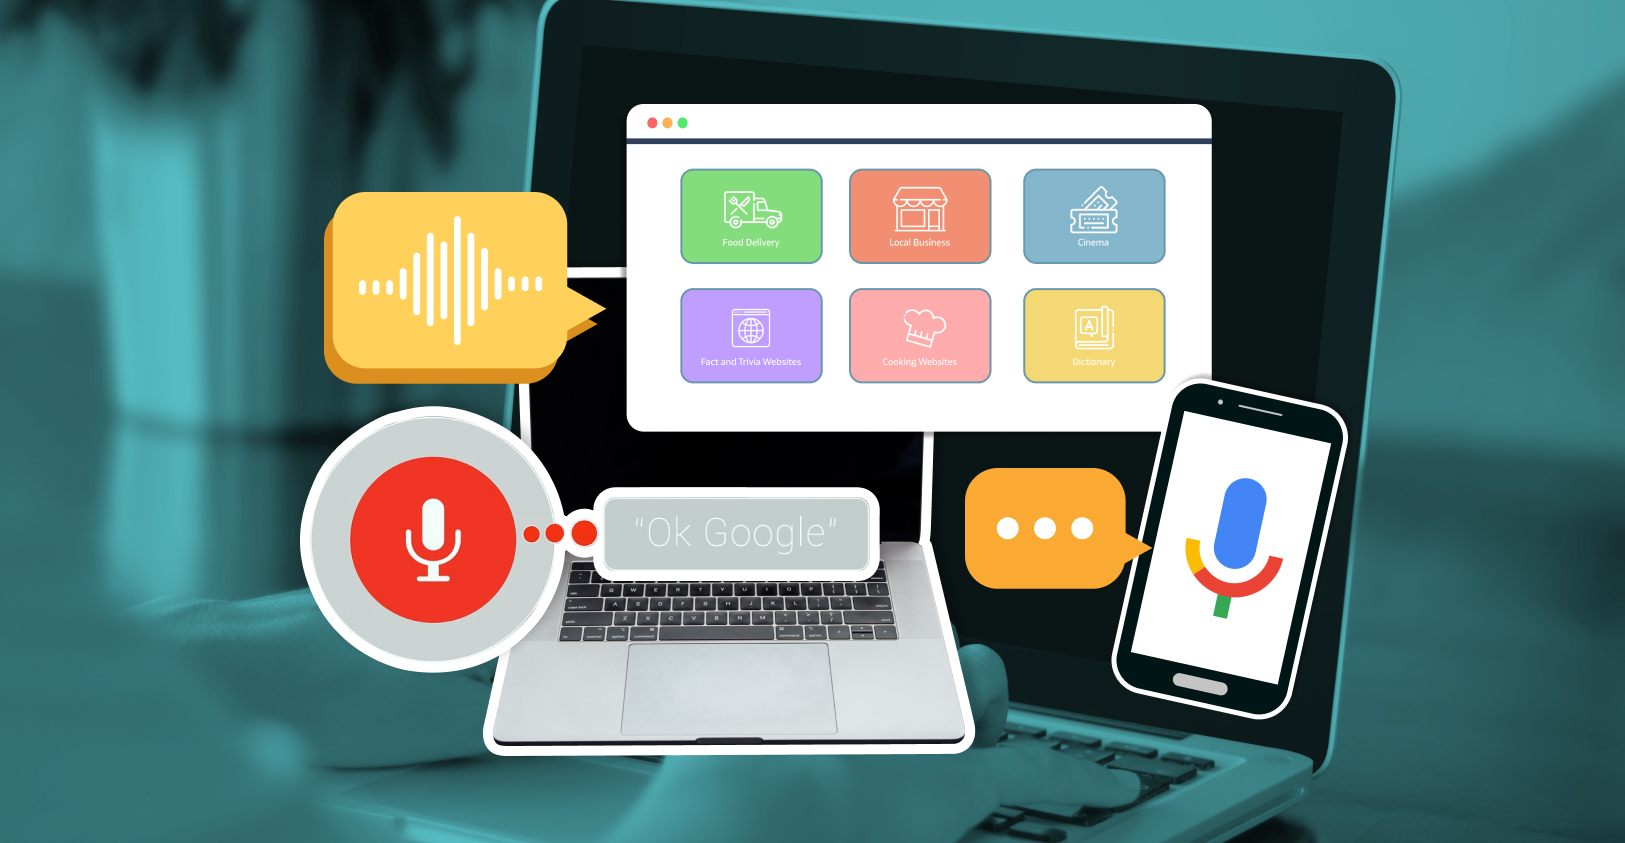 Growth Rocket voice search the future of SEO